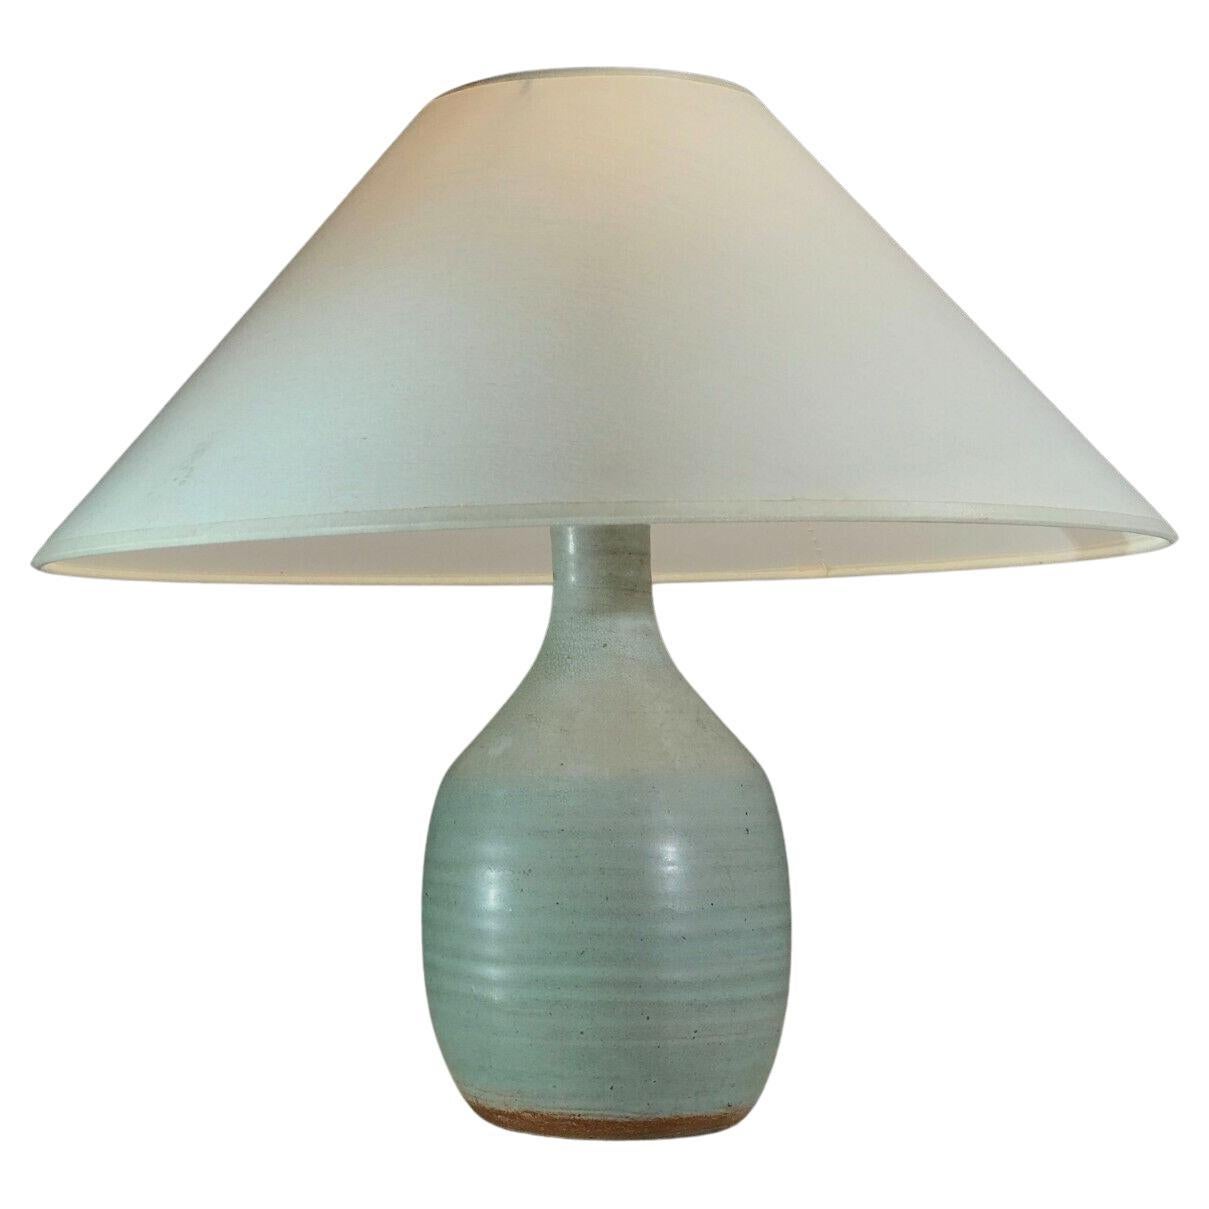 A MID-CENTURY-MODERN NEOCLASSIC Ceramic TABLE LAMP by DRILLON, France 1950 For Sale